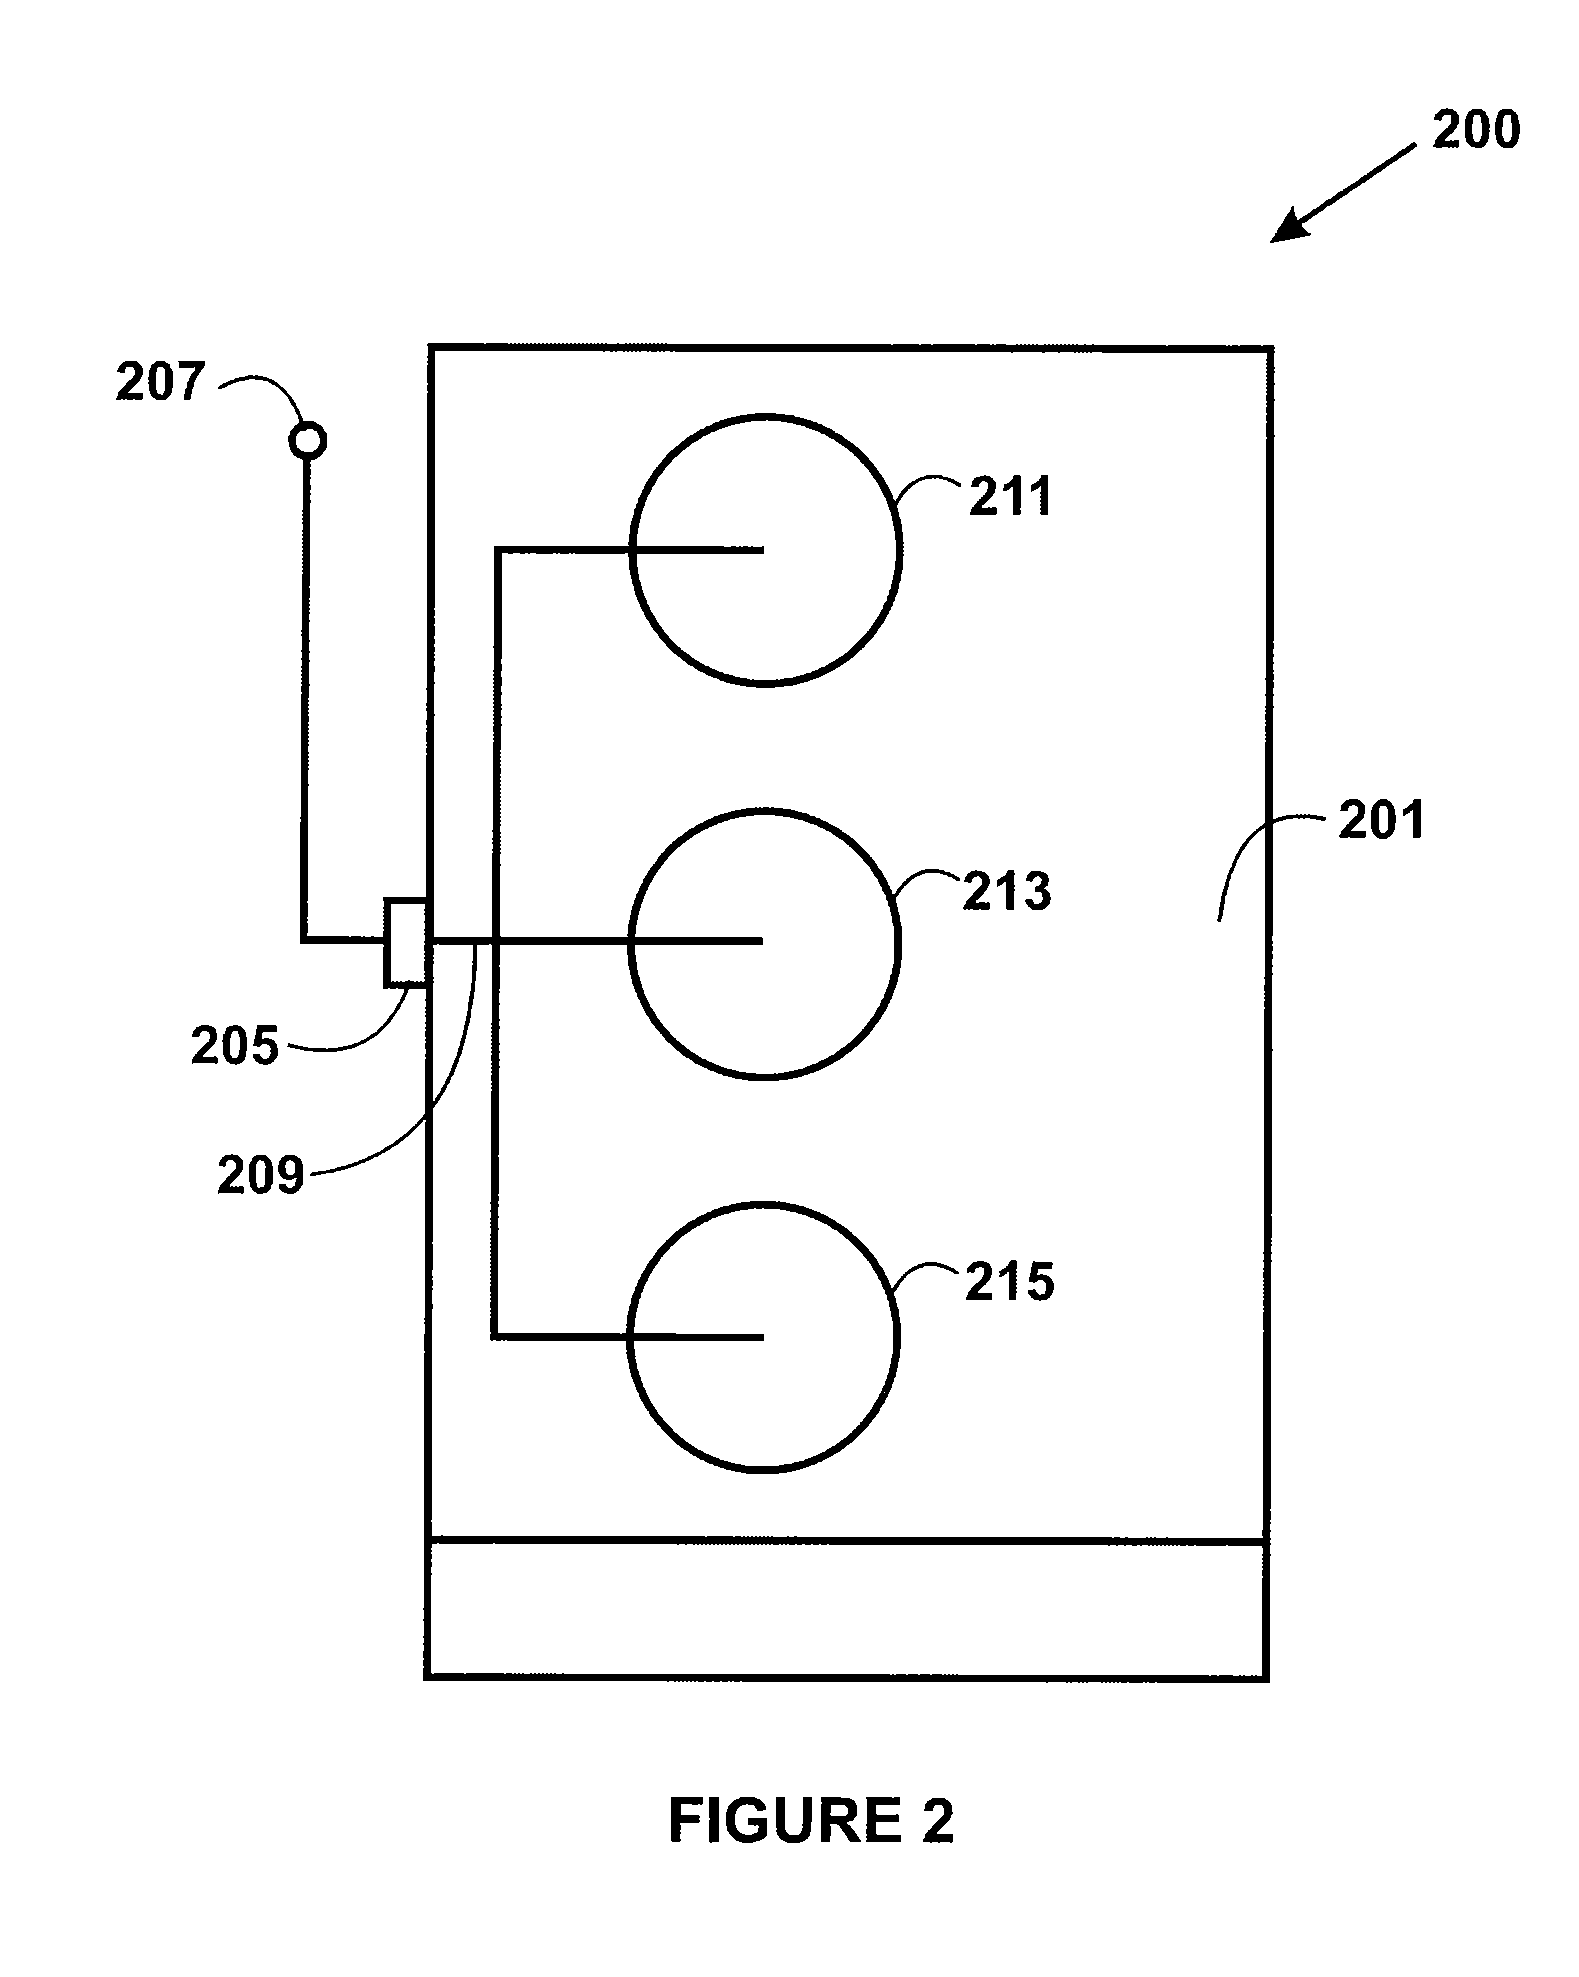 Method and system for power line networking for industrial process control applications